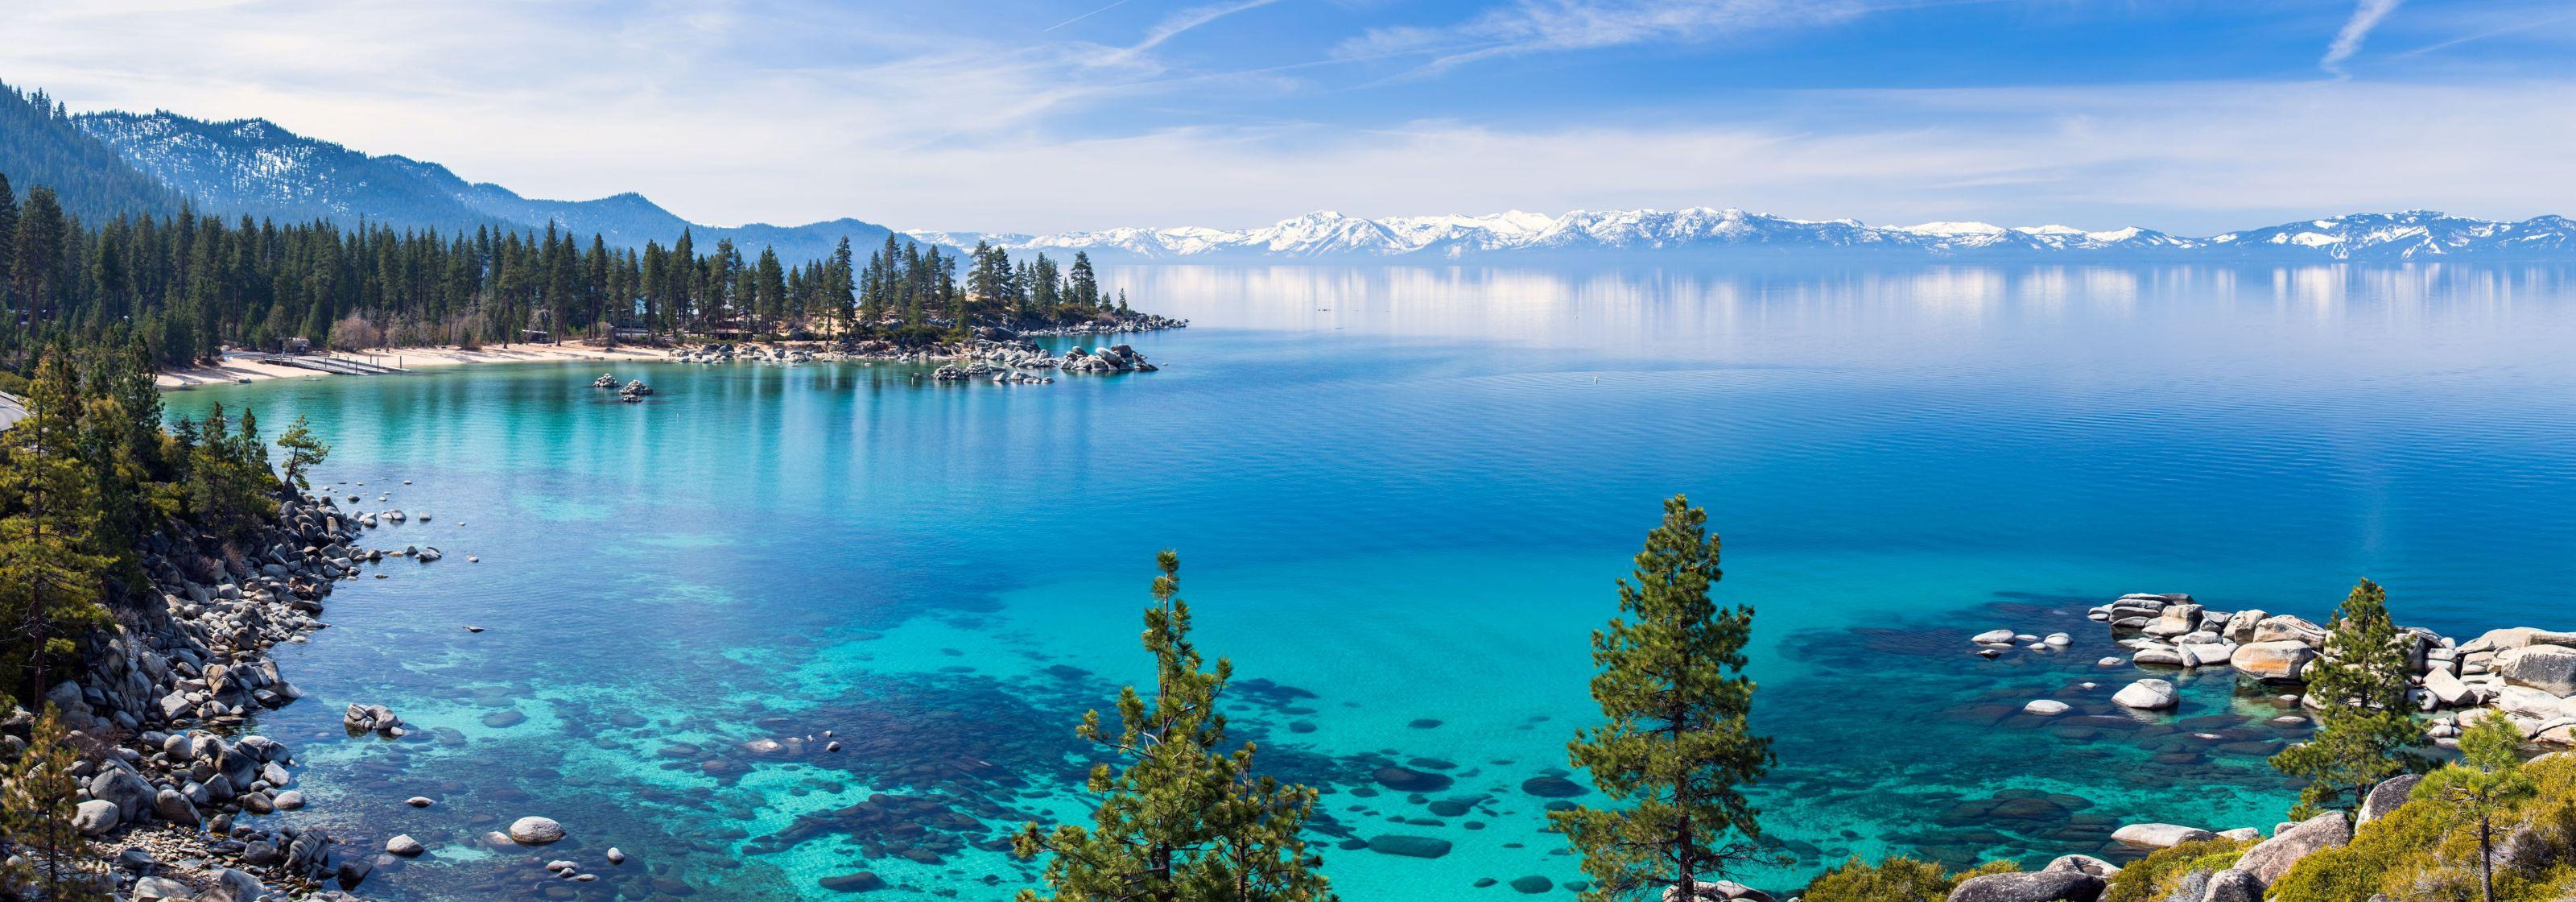 Panoramic view of Lake Tahoe\'s other side featuring mountains, trails, and ski resorts